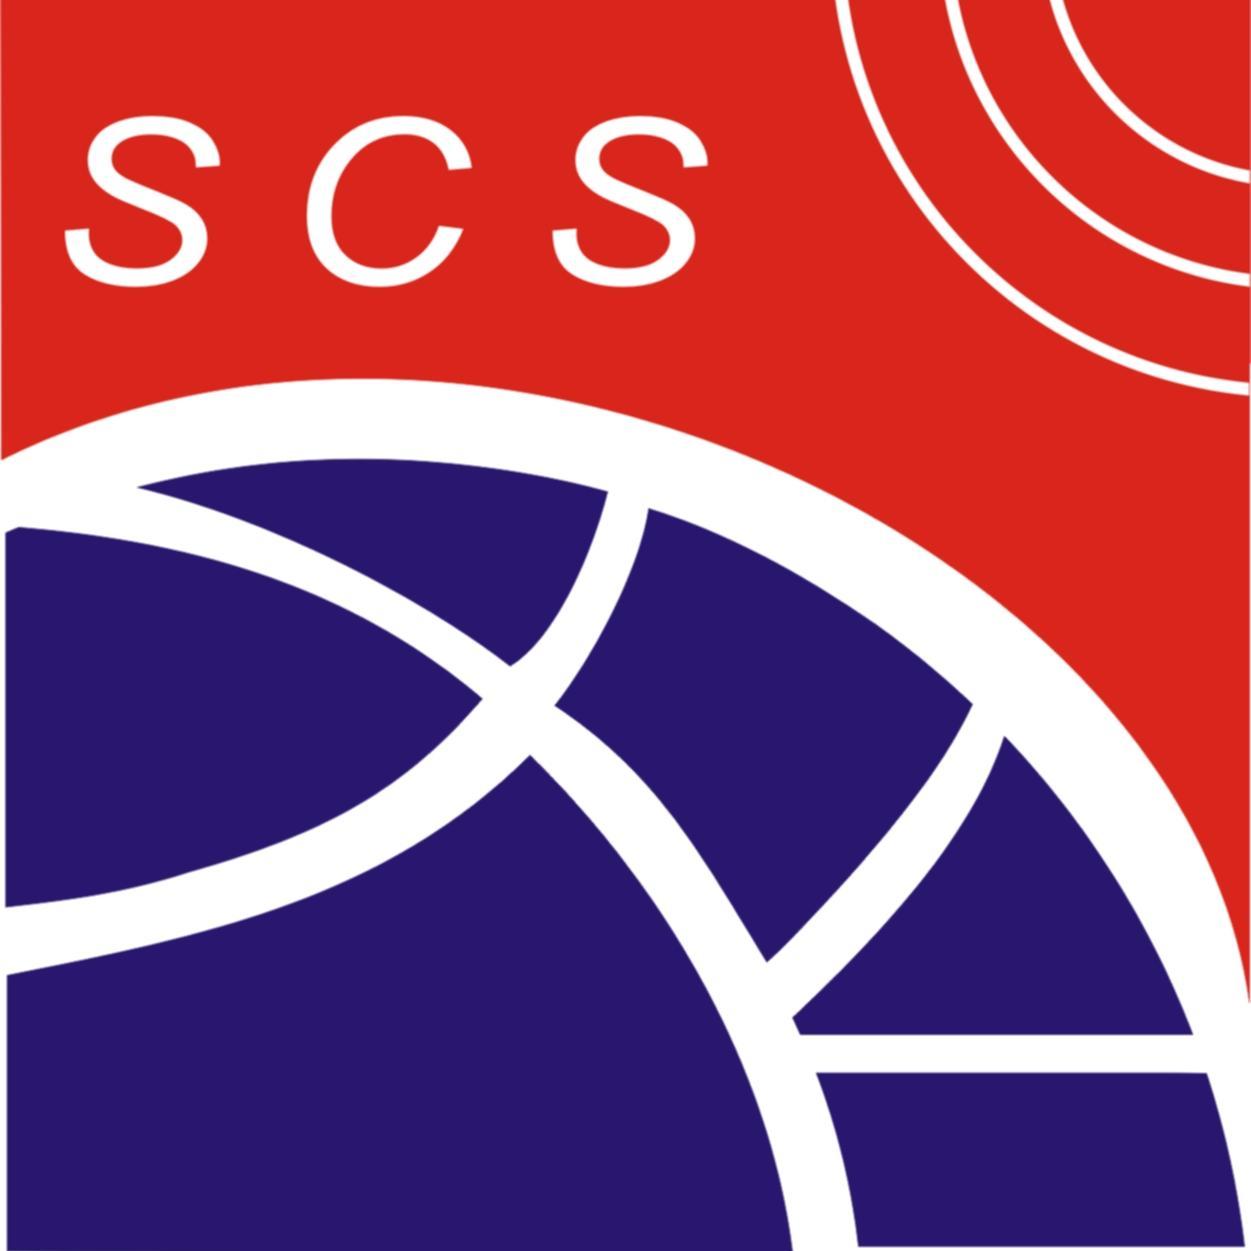 Study Abroad Consultant at SCS Overseas Pvt Ltd.